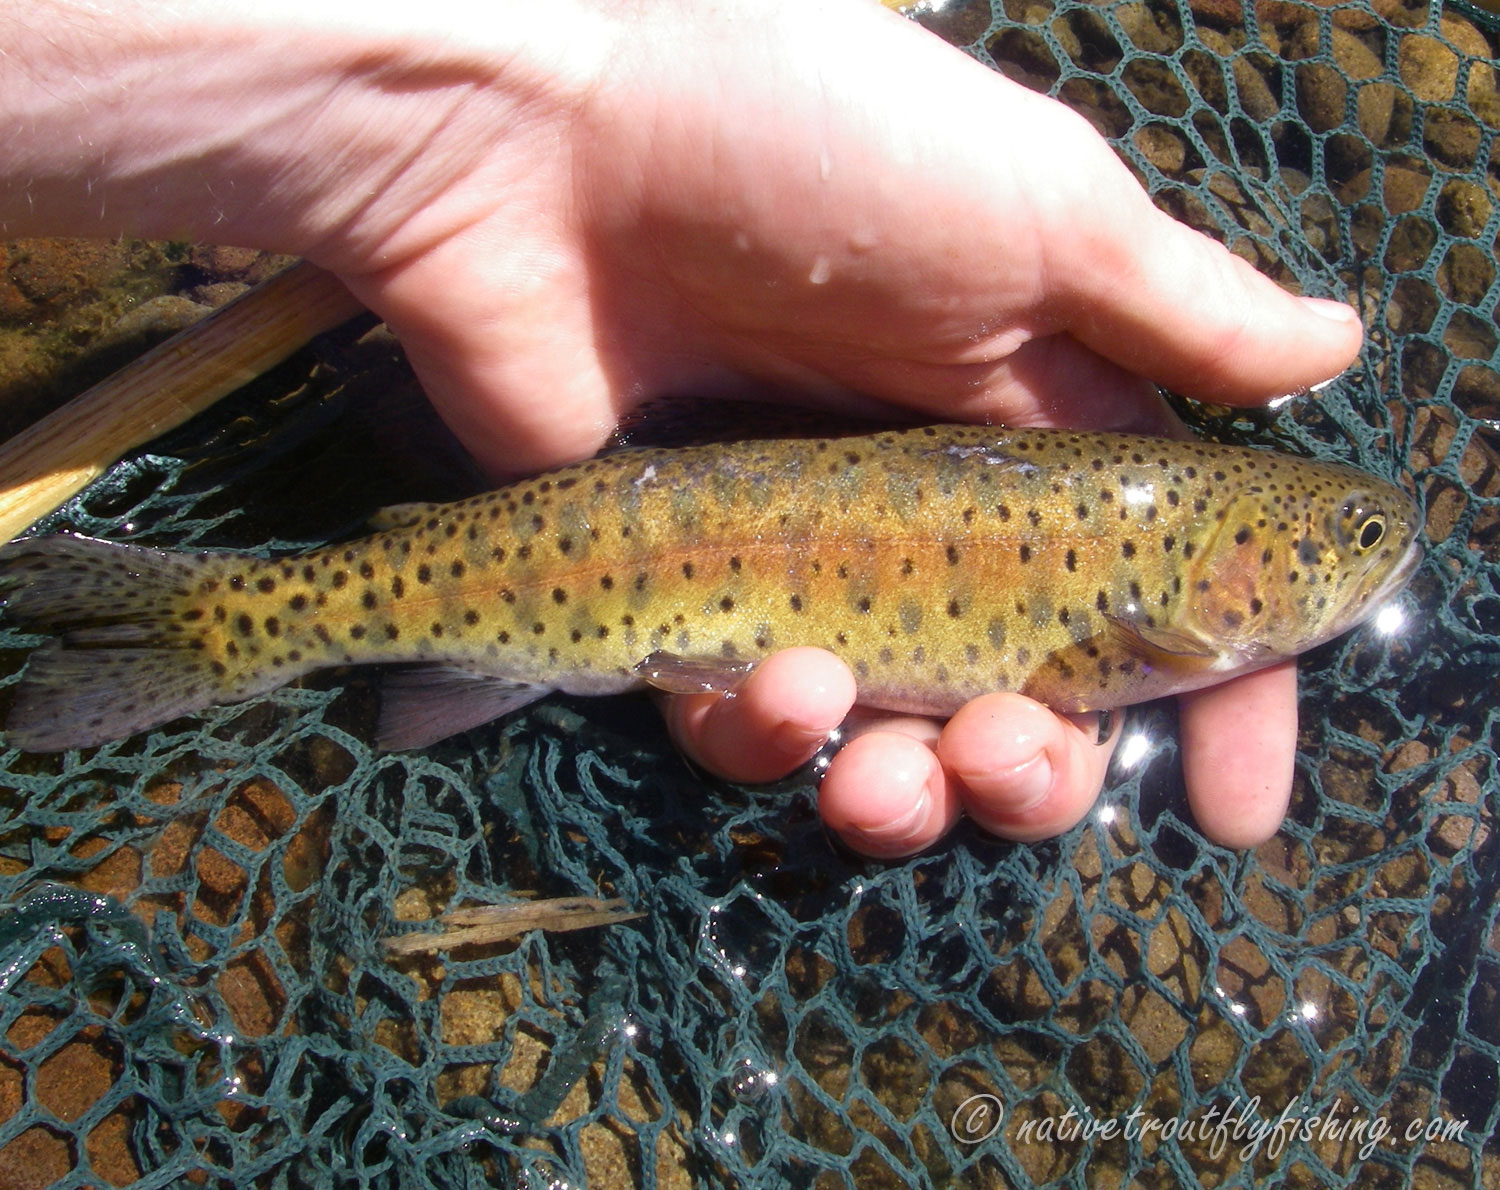 Native Trout Fly Fishing: Lahontan Cutthroat Trout